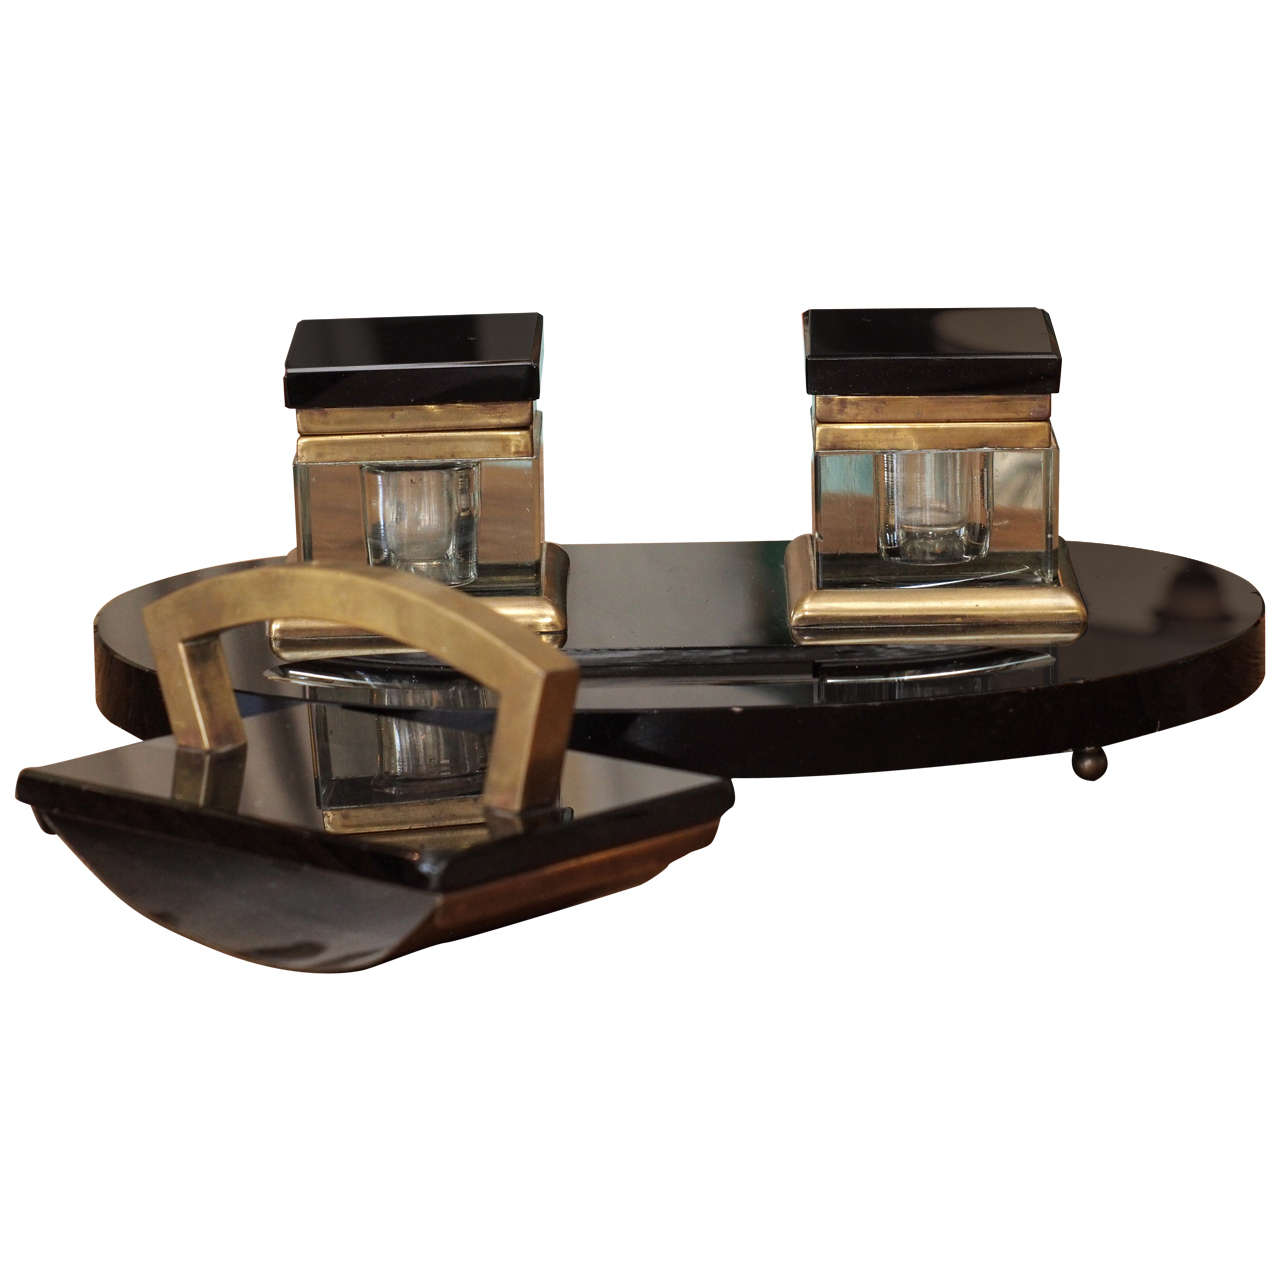 Early 20th C French Art Deco Black Marble Crystal & Brass Desk Set with Blotter For Sale